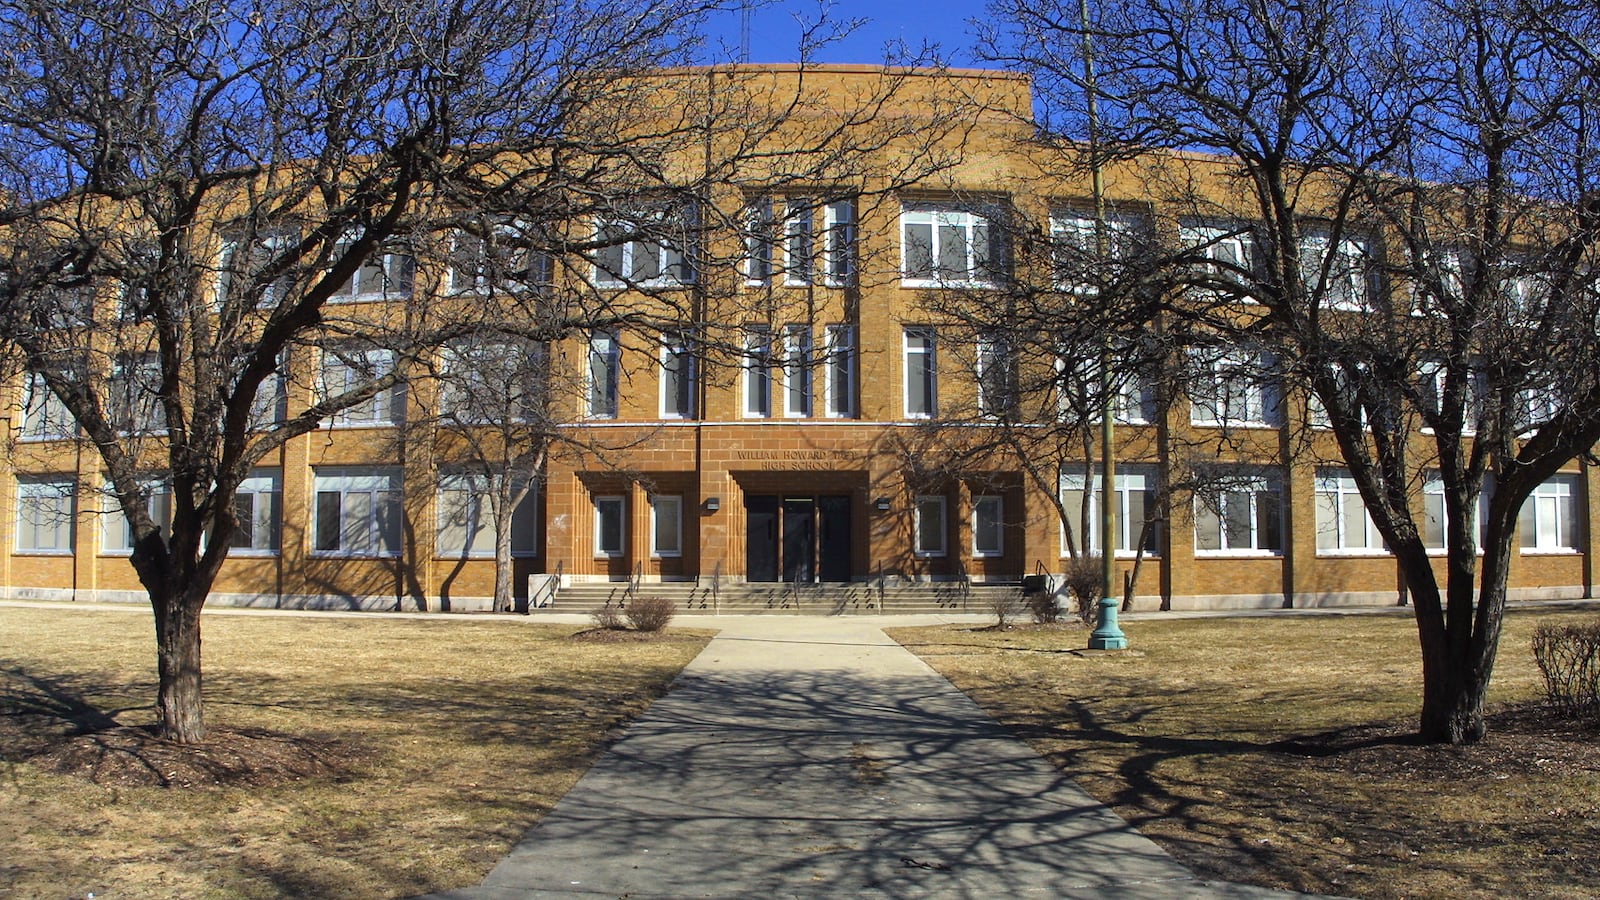 Taft High School is one of Chicago Public Schools' most overenrolled campuses. In 2019, it will spin off its freshman class to a separate campus.